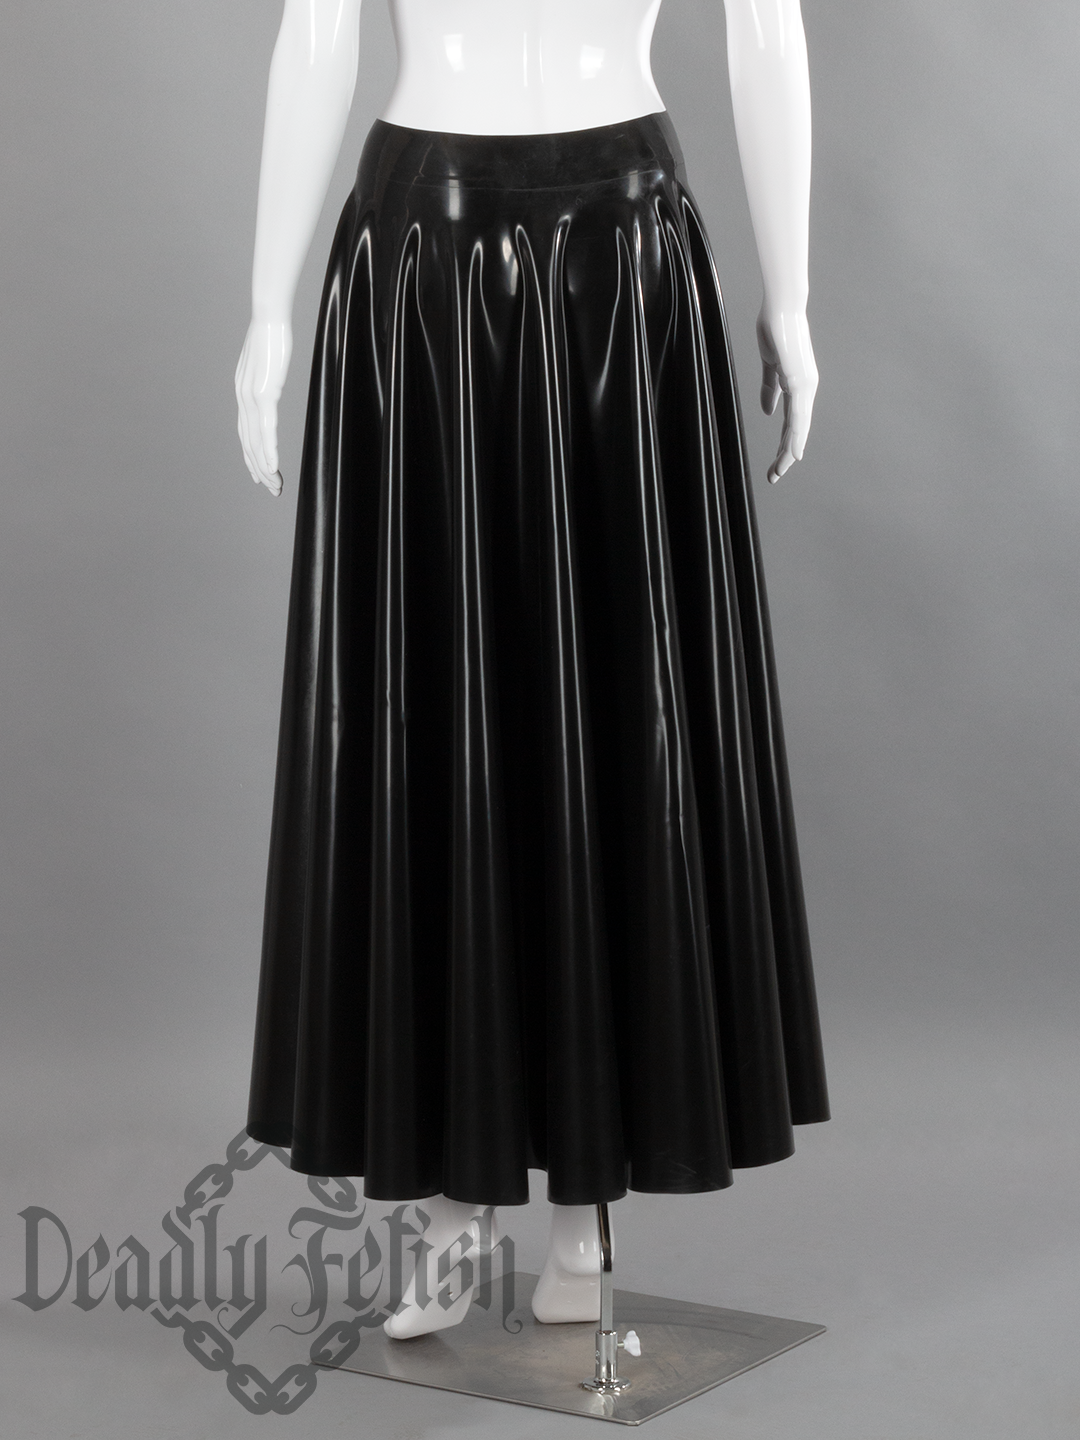 Deadly Fetish Made-To-Order Latex: Skirt #01